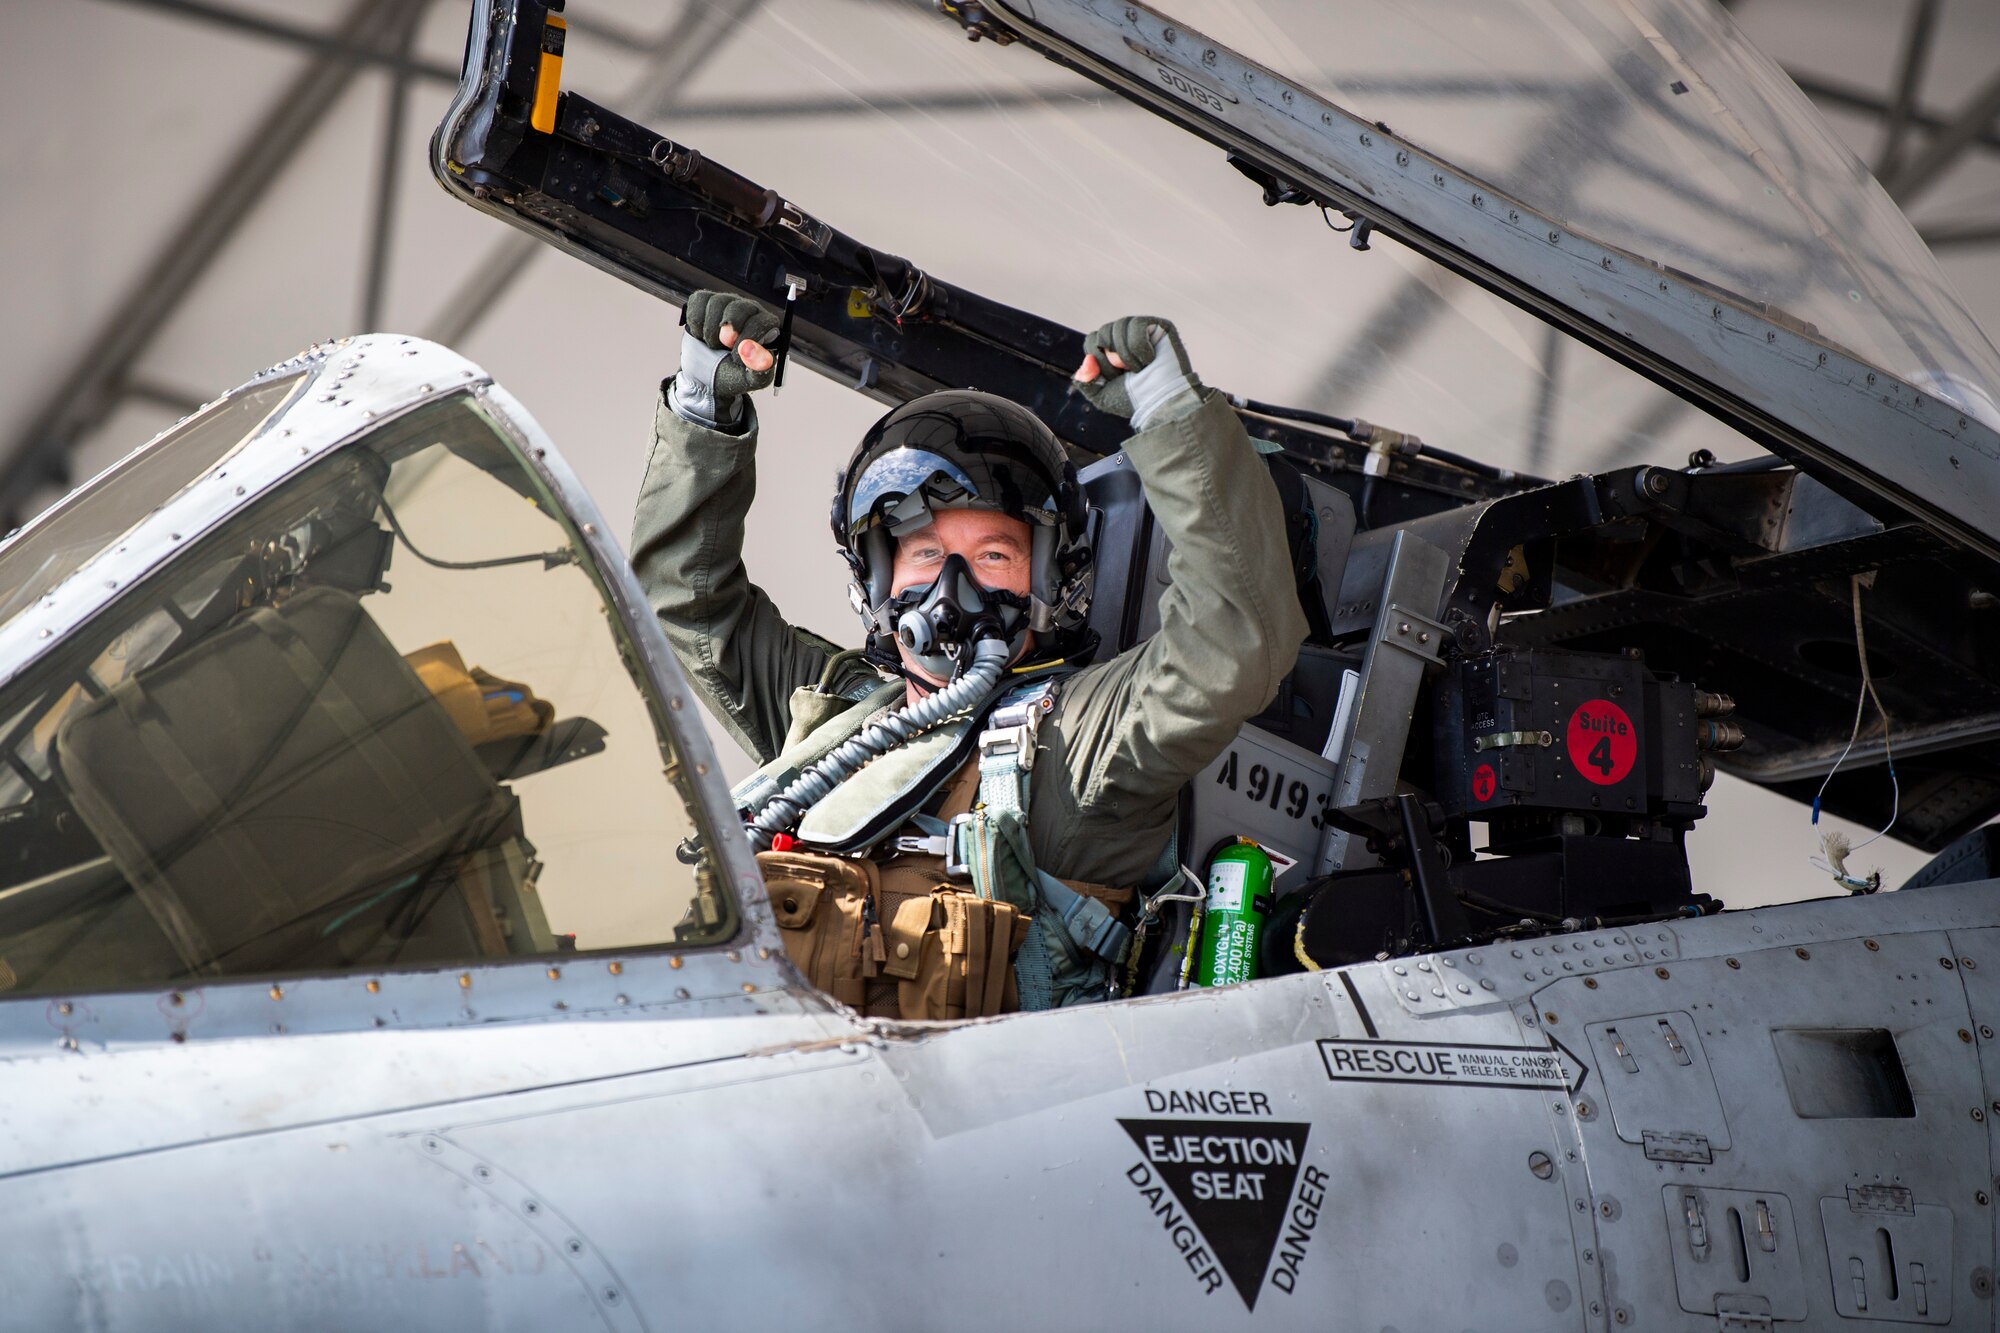 U.S. Air Force Maj. Tyler Ribar, 74th Fighter Squadron A-10C Thunderbolt II pilot, prepares for take-off during Exercise Ready Tiger 24-1 at Moody Air Force Base, Georgia, April 9, 2024. The 23rd Fighter Group directs the flying and maintenance operations for the U.S. Air Forces largest A-10C fighter group, consisting of two combat-ready A-10C squadrons and an operations support squadron. The group ensures overall combat training and readiness for over 90 pilots and 180 support personnel. (U.S. Air Force photo by 2nd Lt. Benjamin Williams)